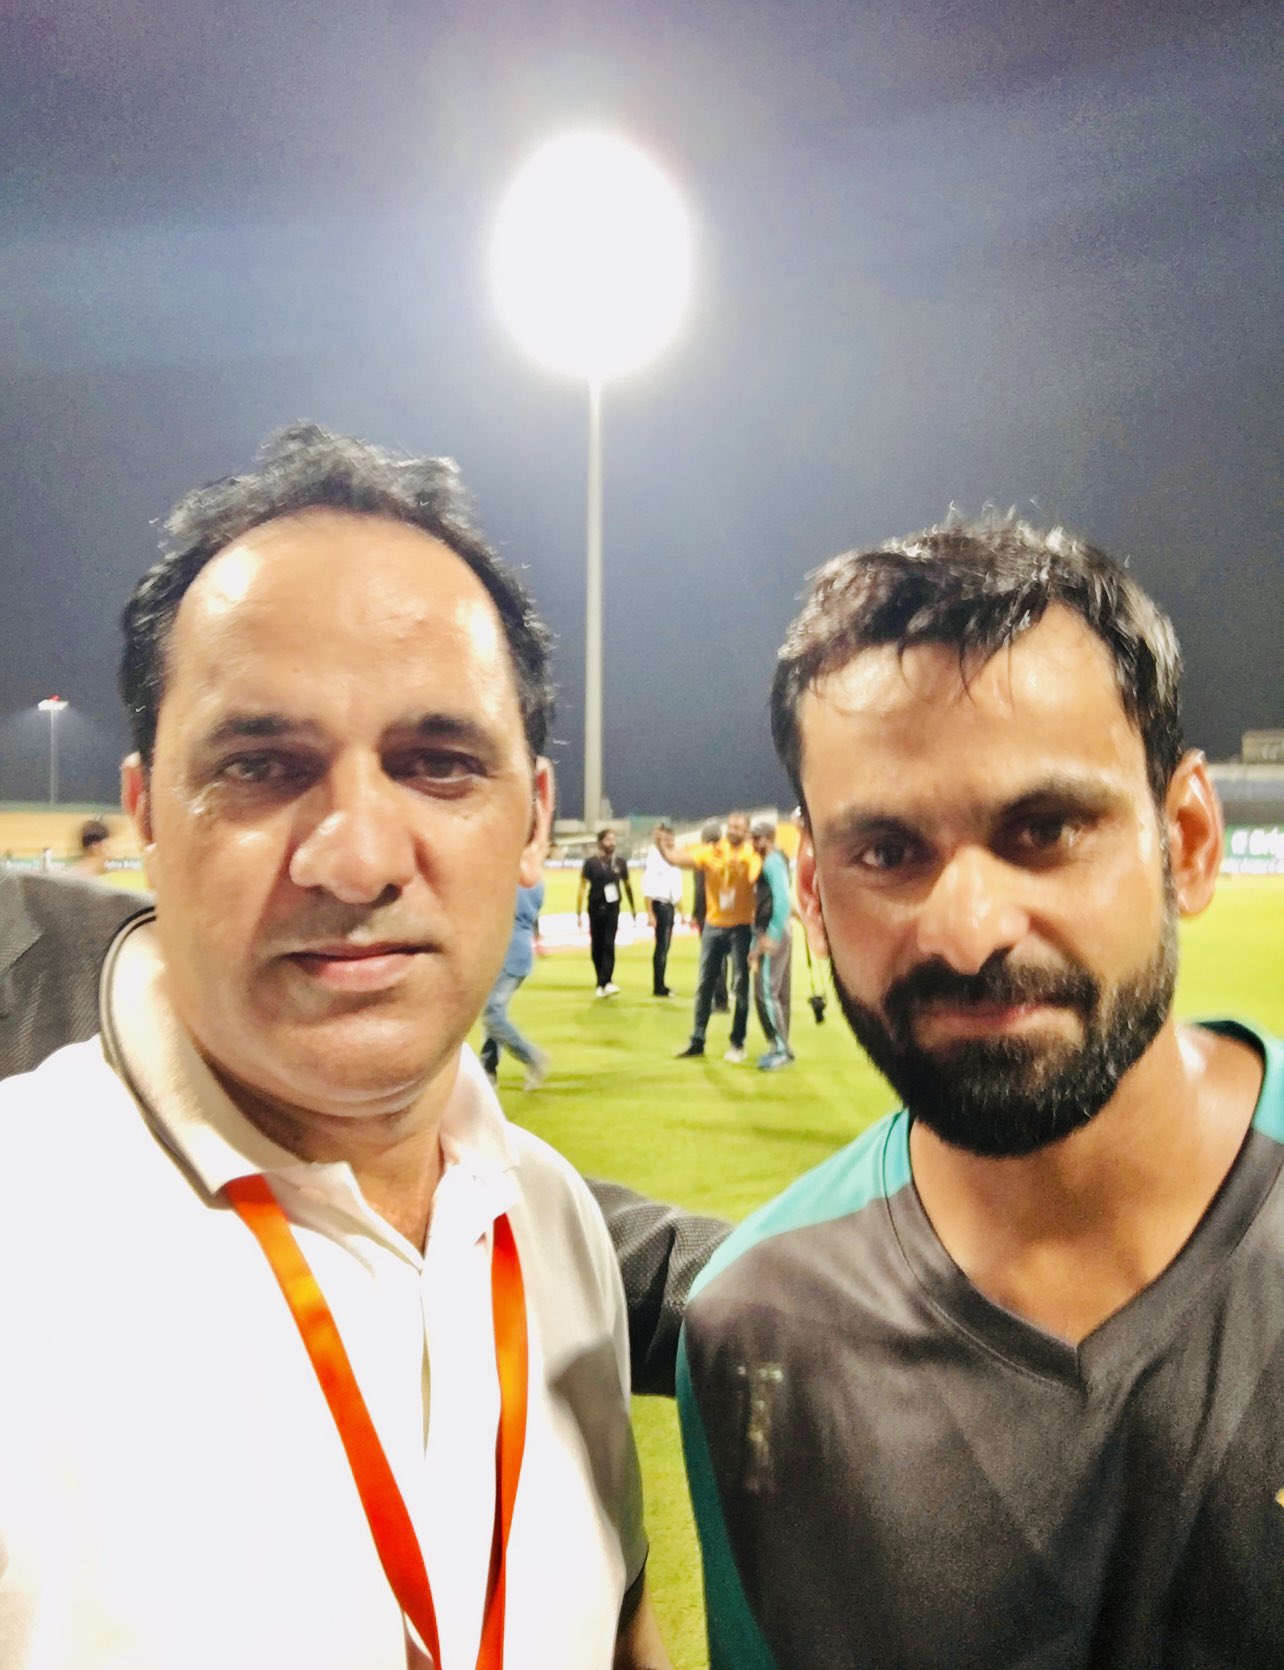 A very birthday Mohammad Hafeez .Wishing you best of luck for T20   